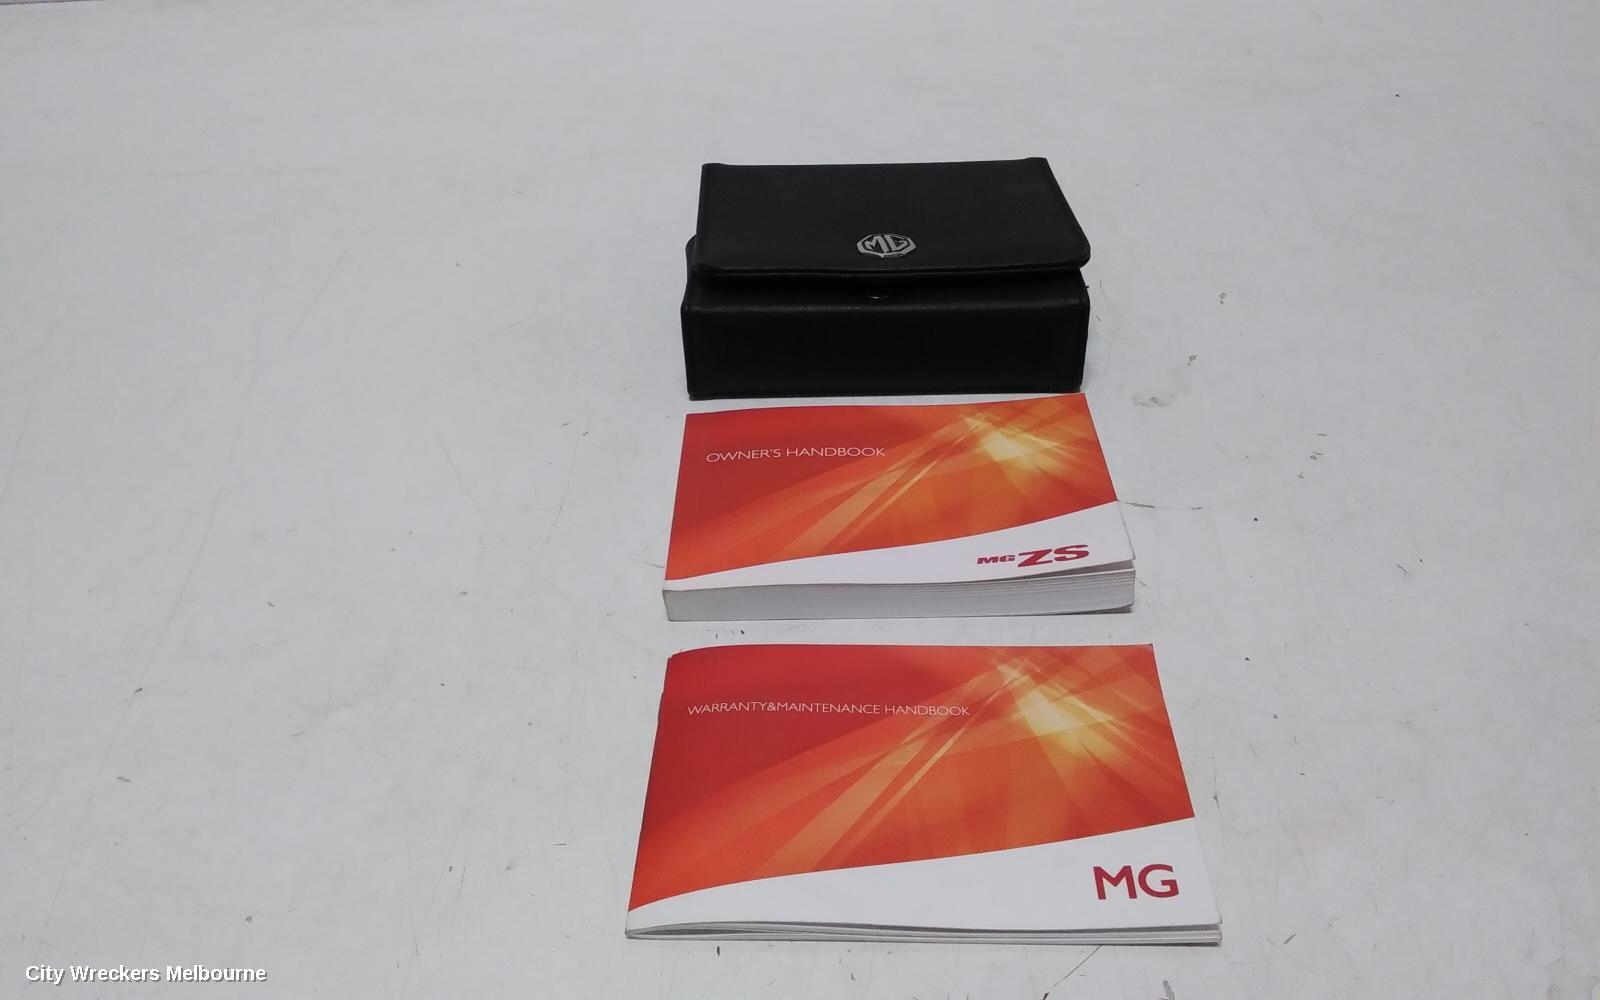 MG ZS 2018 Owners Handbook